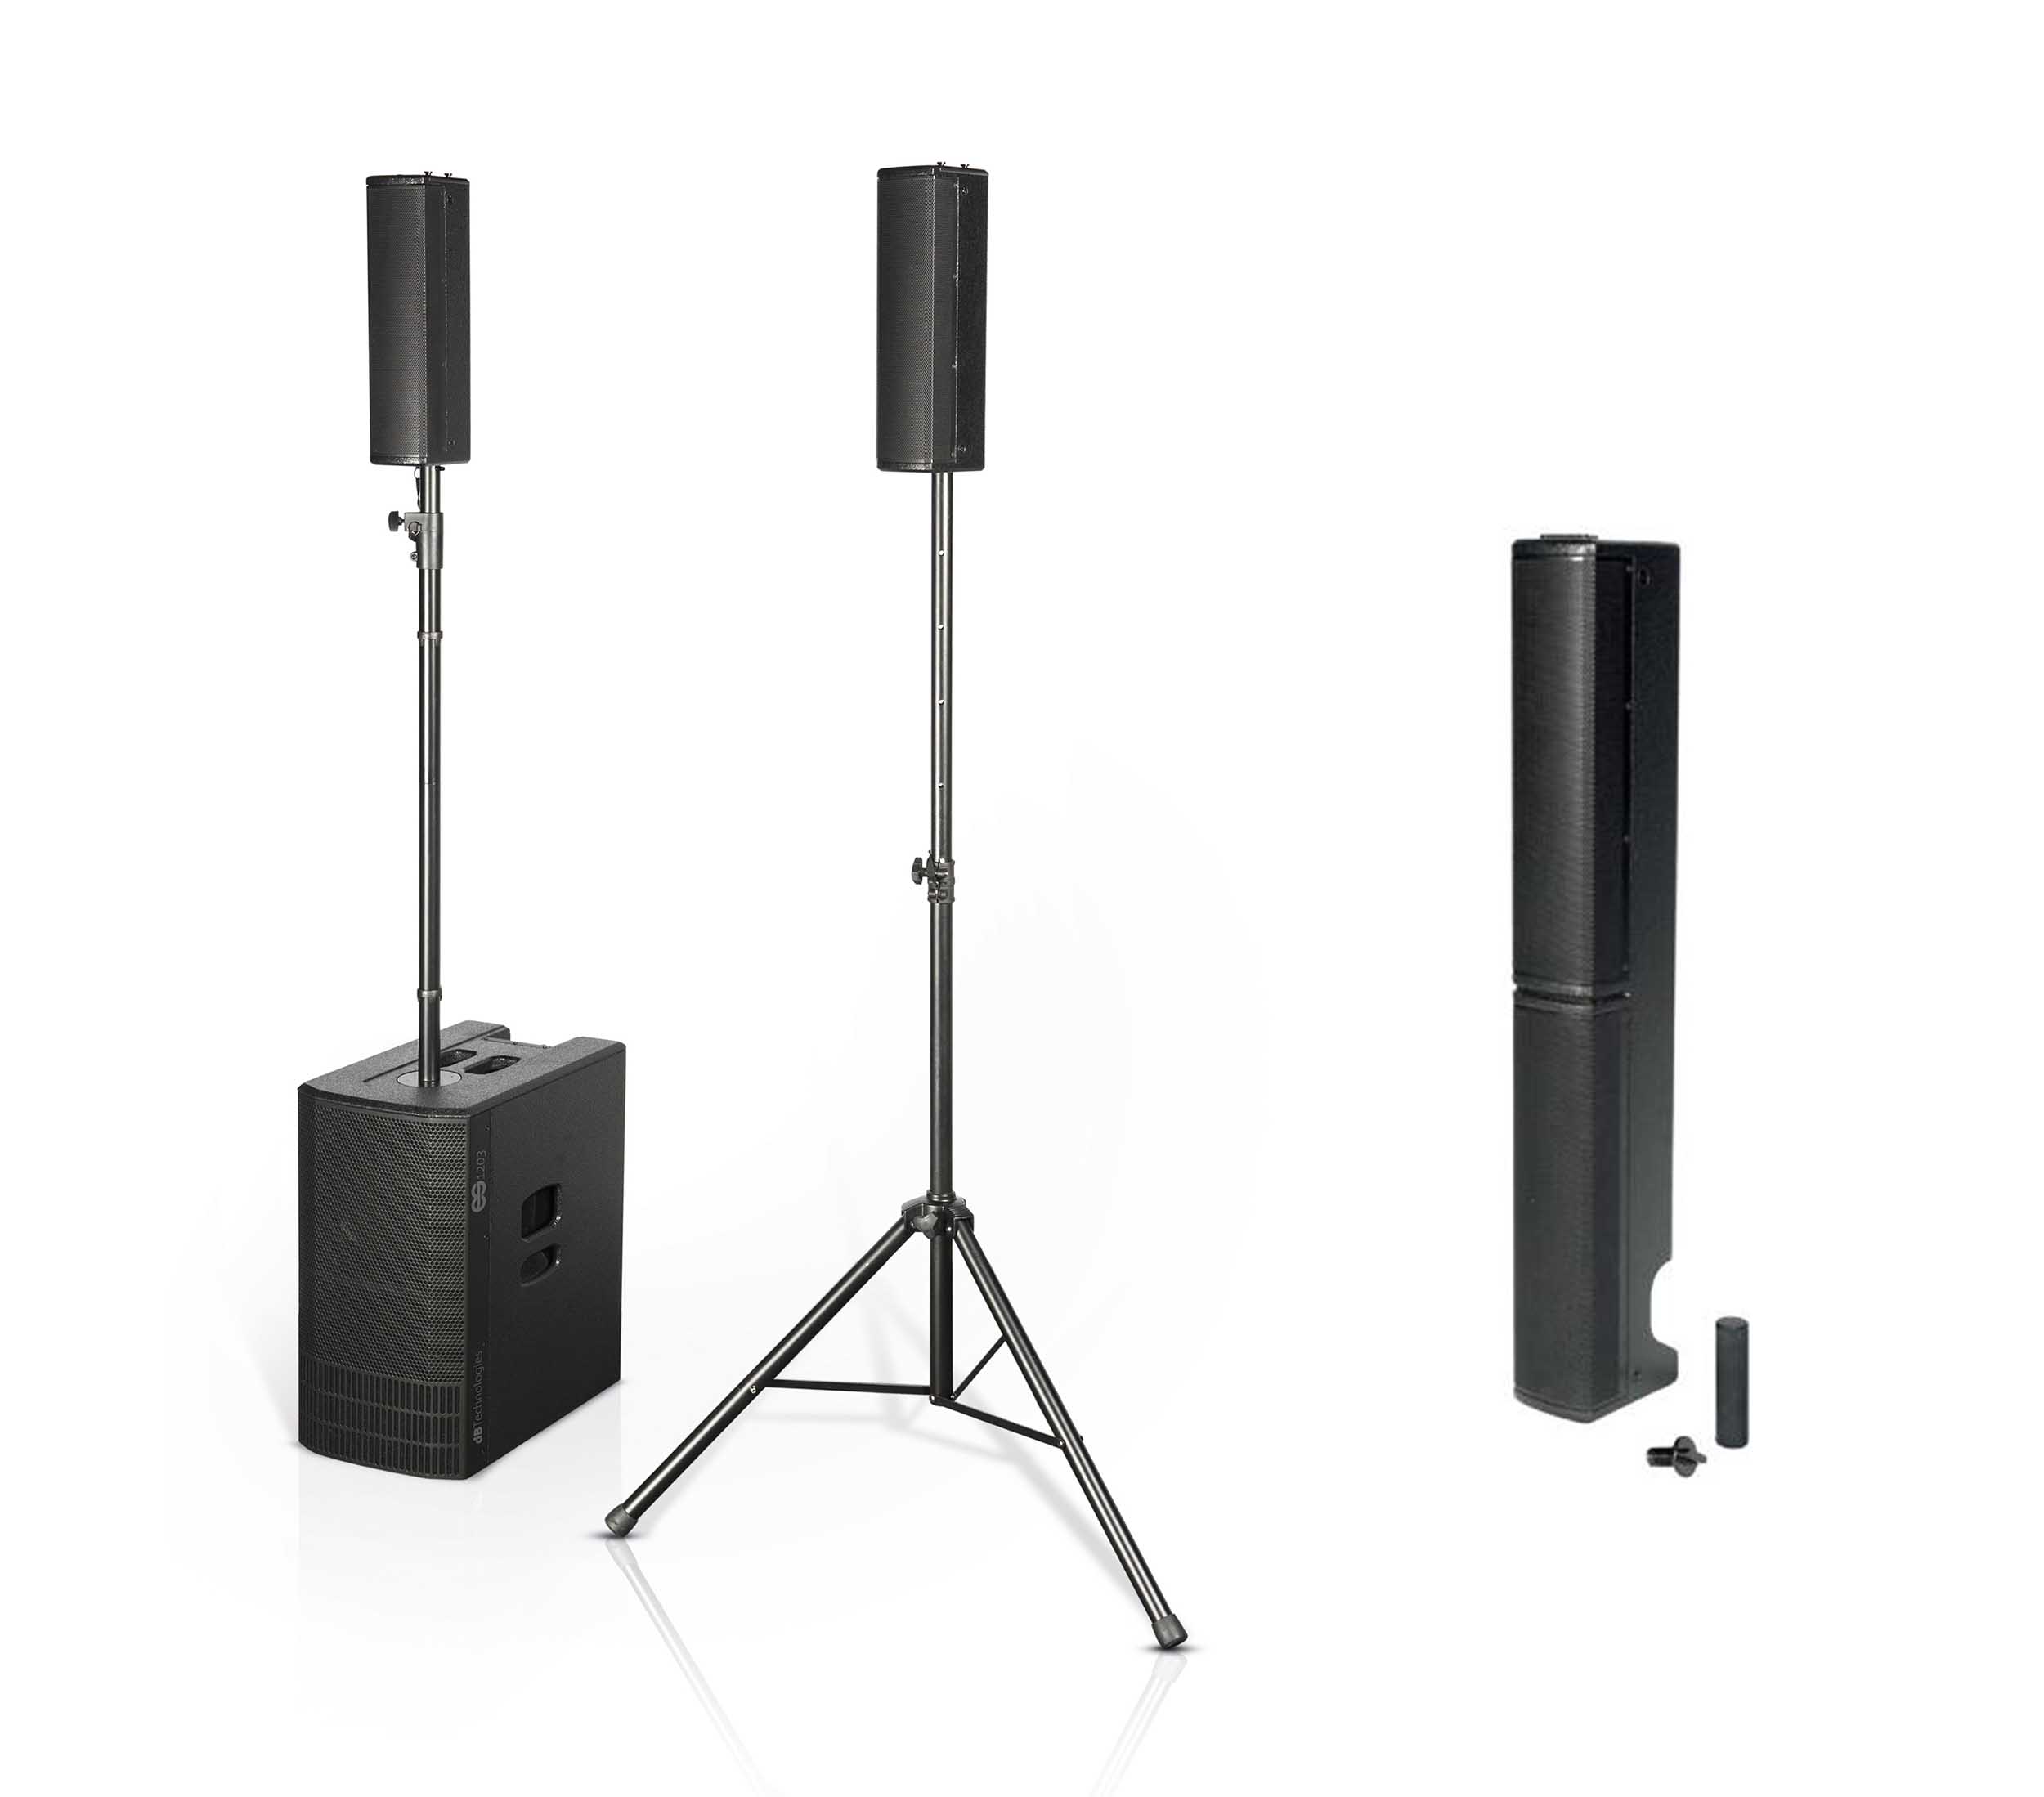 dB Technologies ES1203DP Portable Stereo Sound System DJ Package with Design Pole - Black by DB Technologies